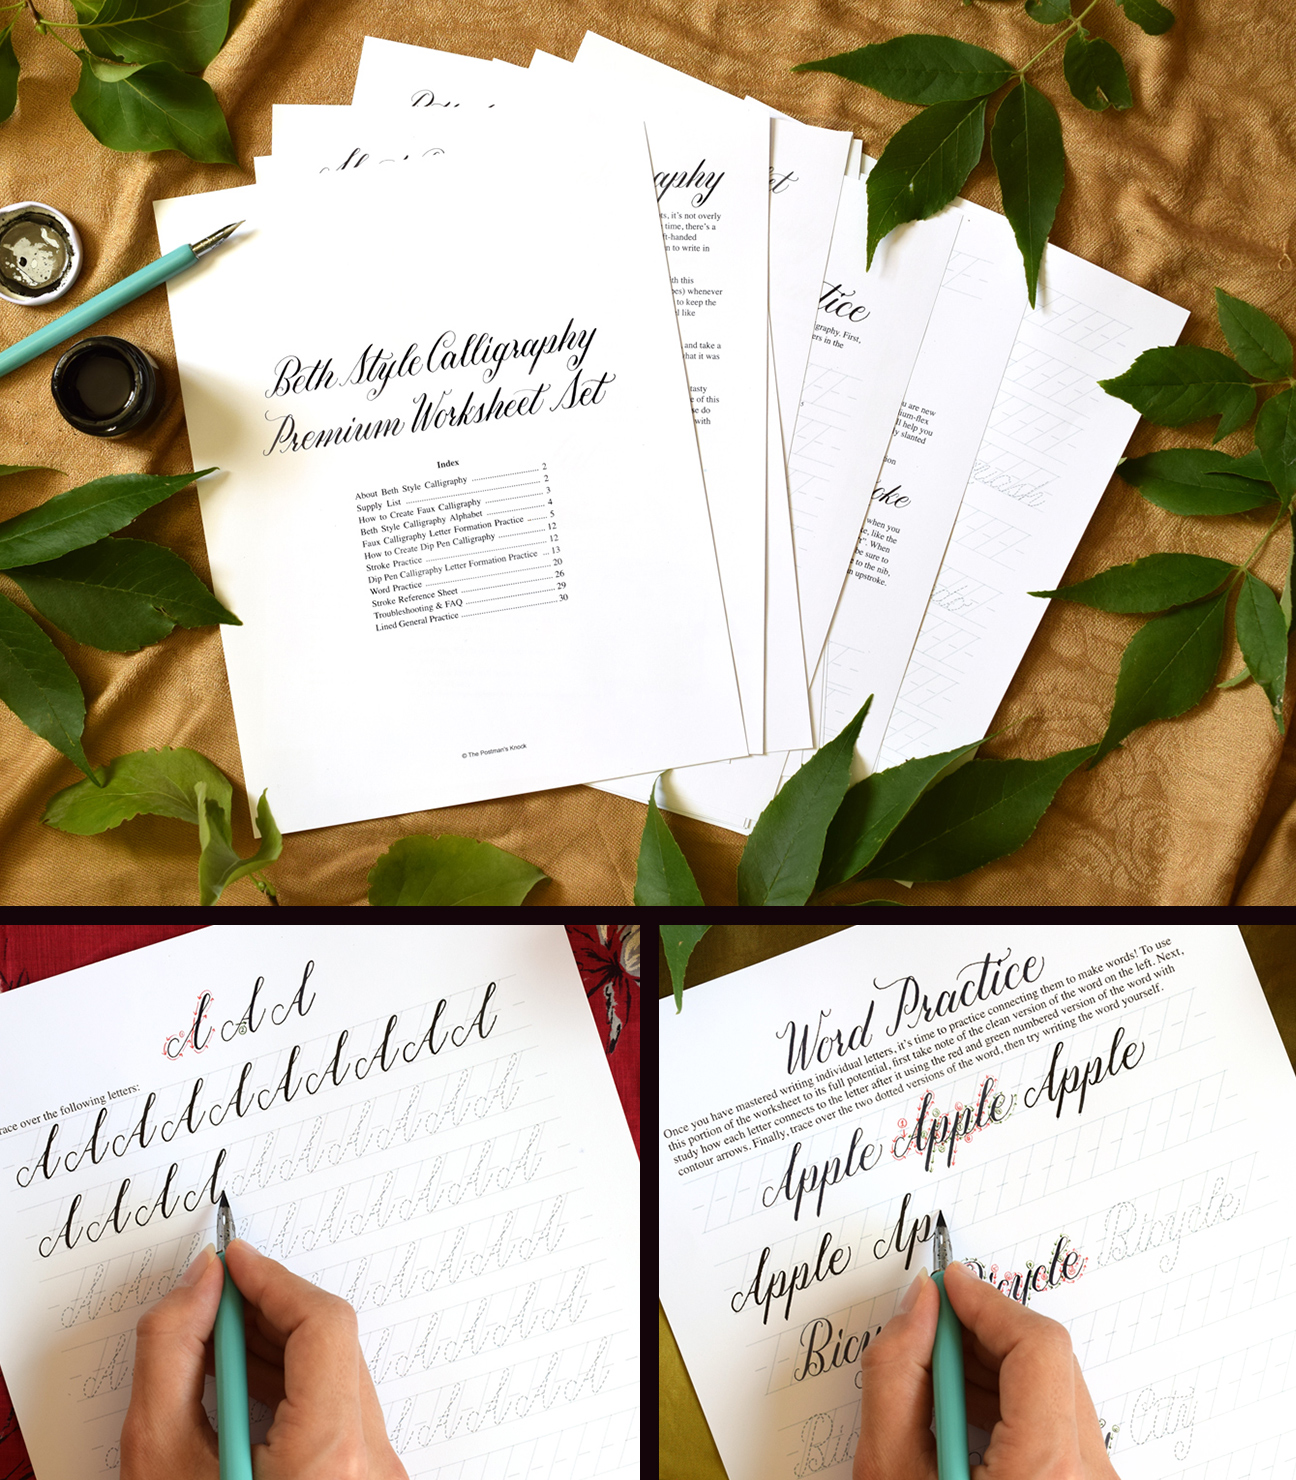 Introducing the All New Beth Style Calligraphy Worksheet